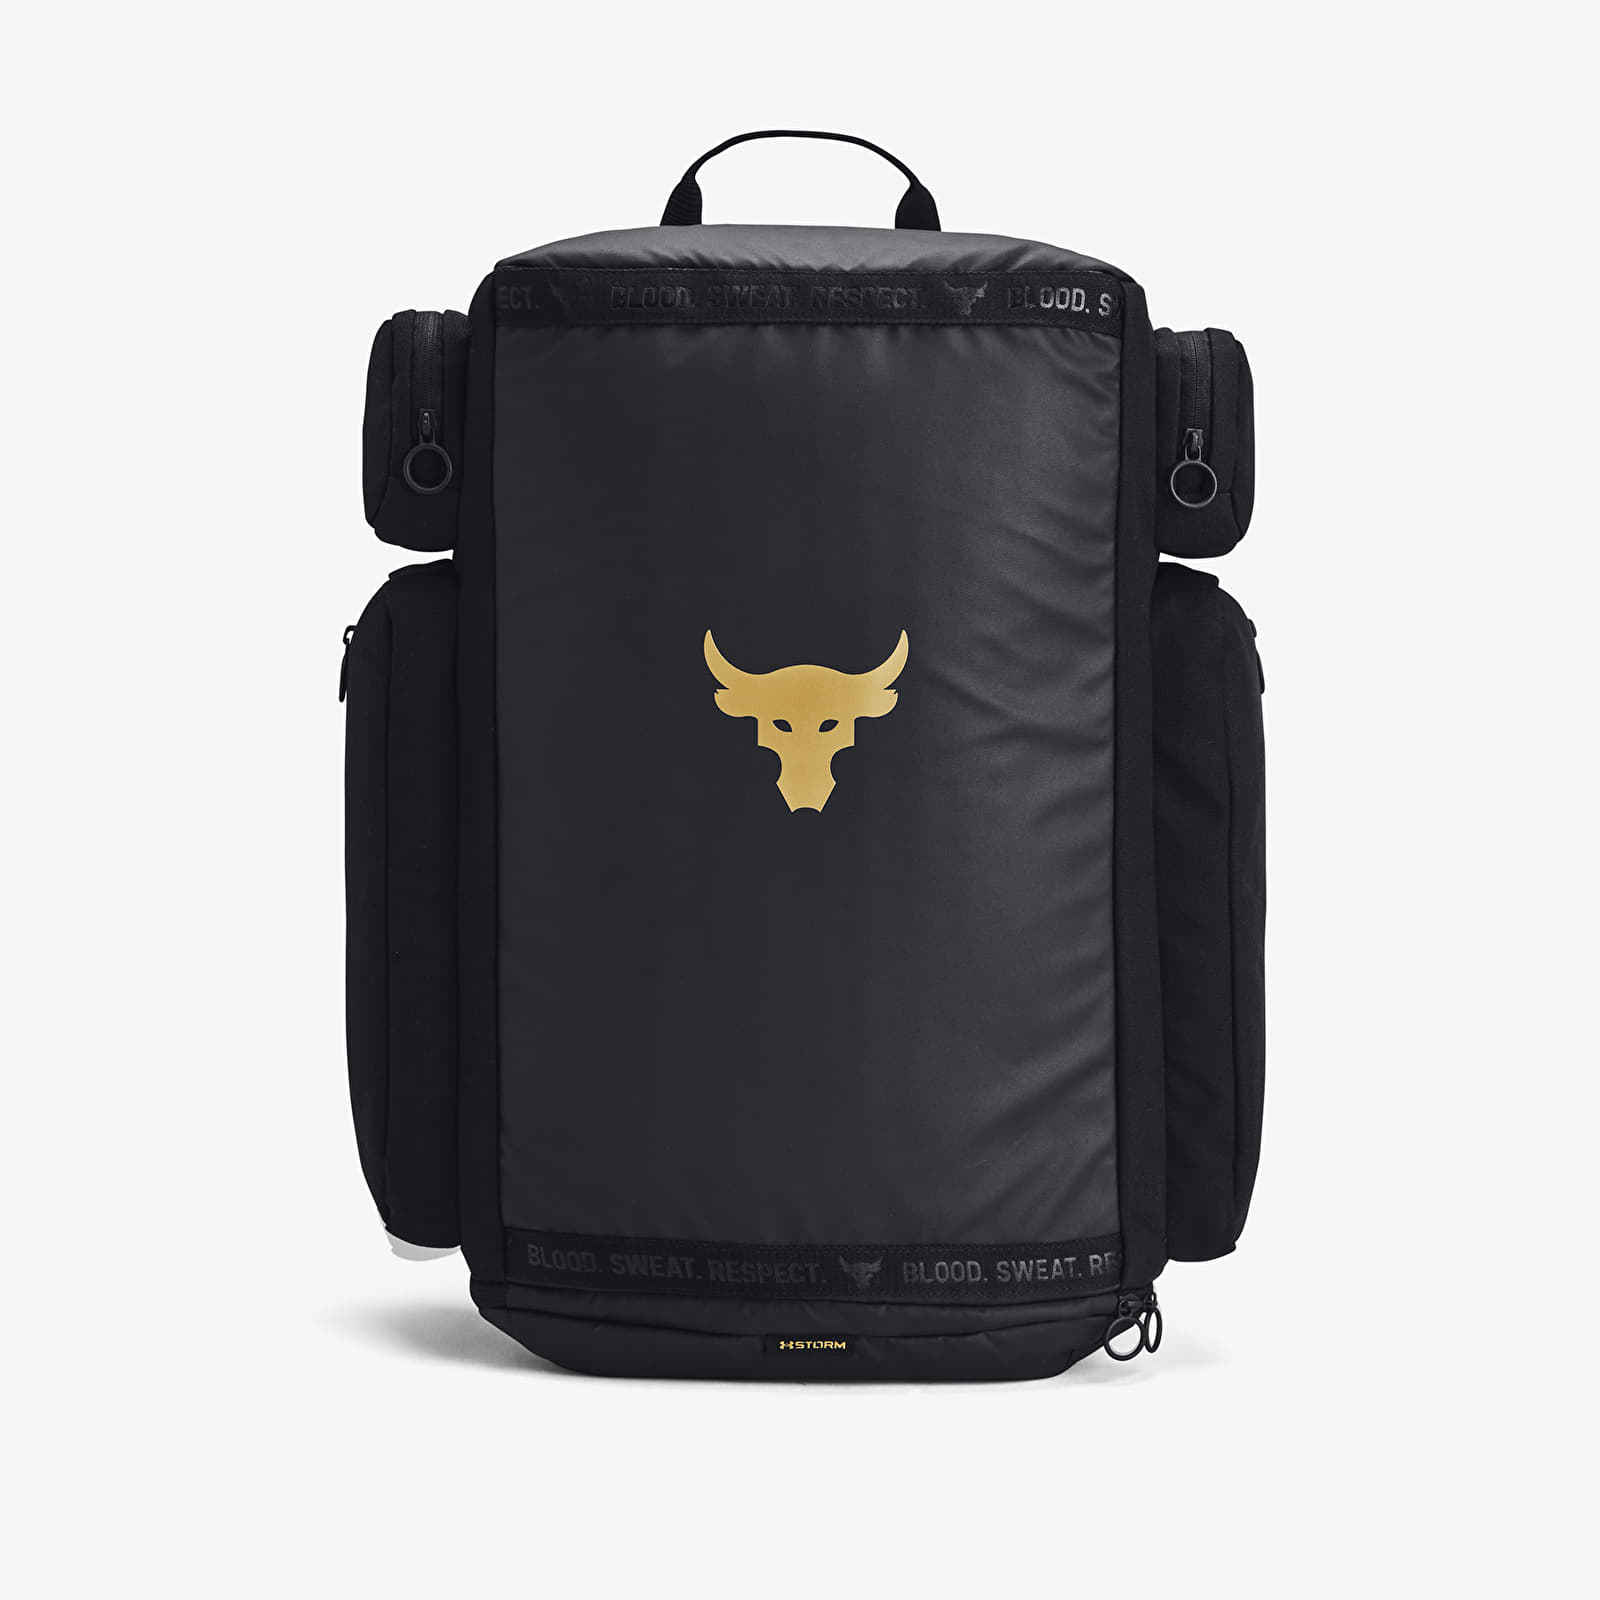 Under Armour - project rock duffle backpack black/ black/ metallic gold